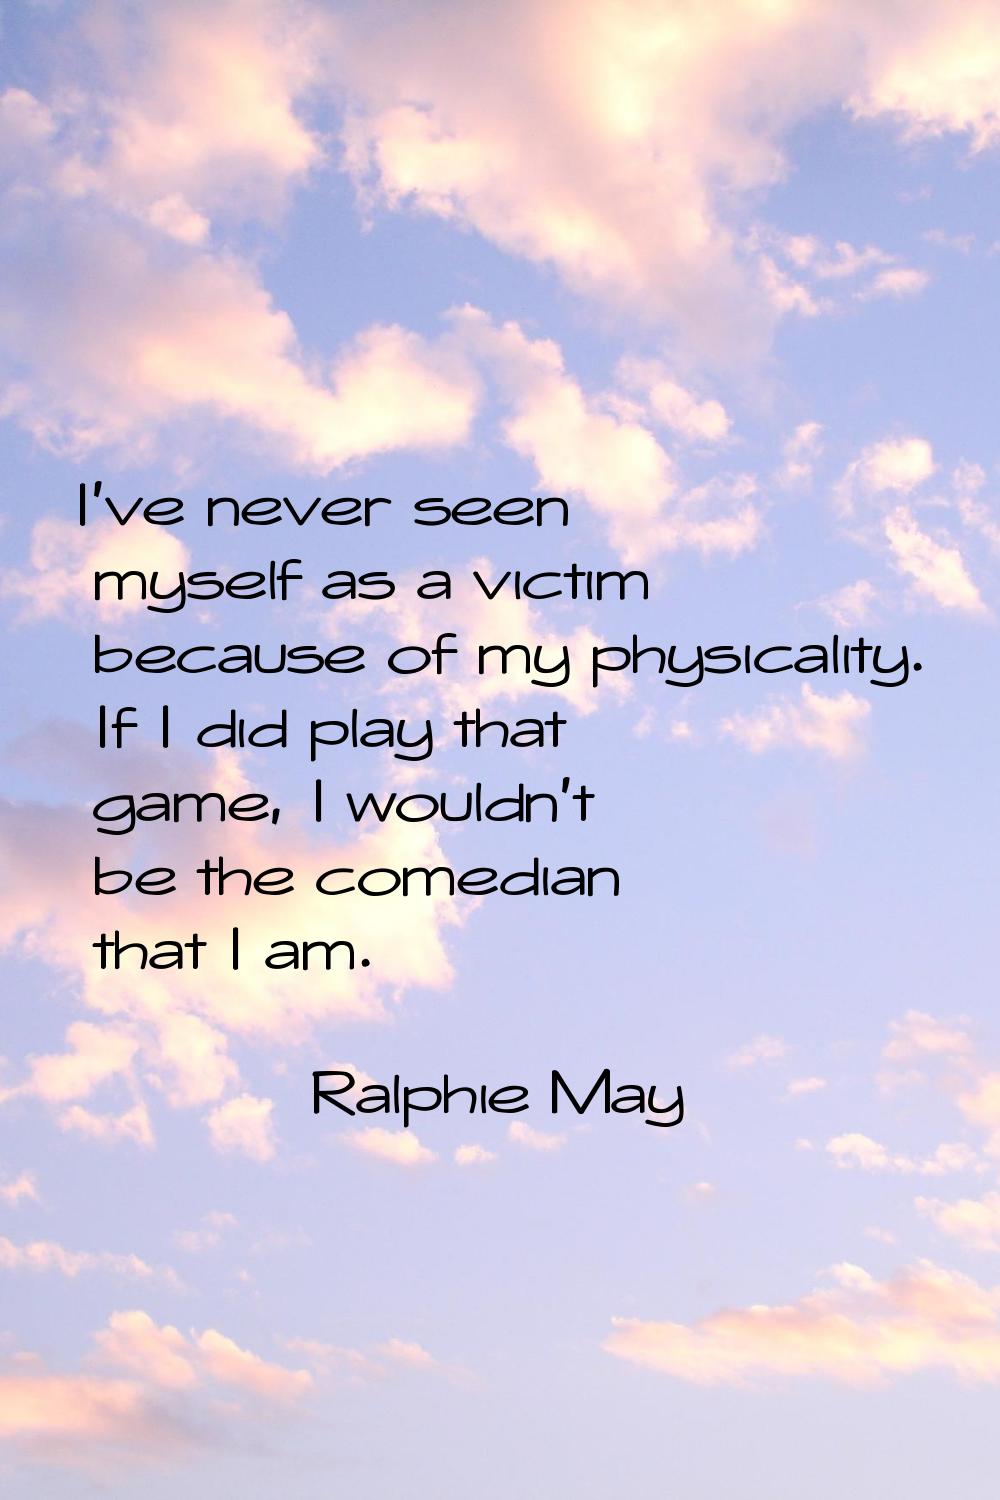 I've never seen myself as a victim because of my physicality. If I did play that game, I wouldn't b